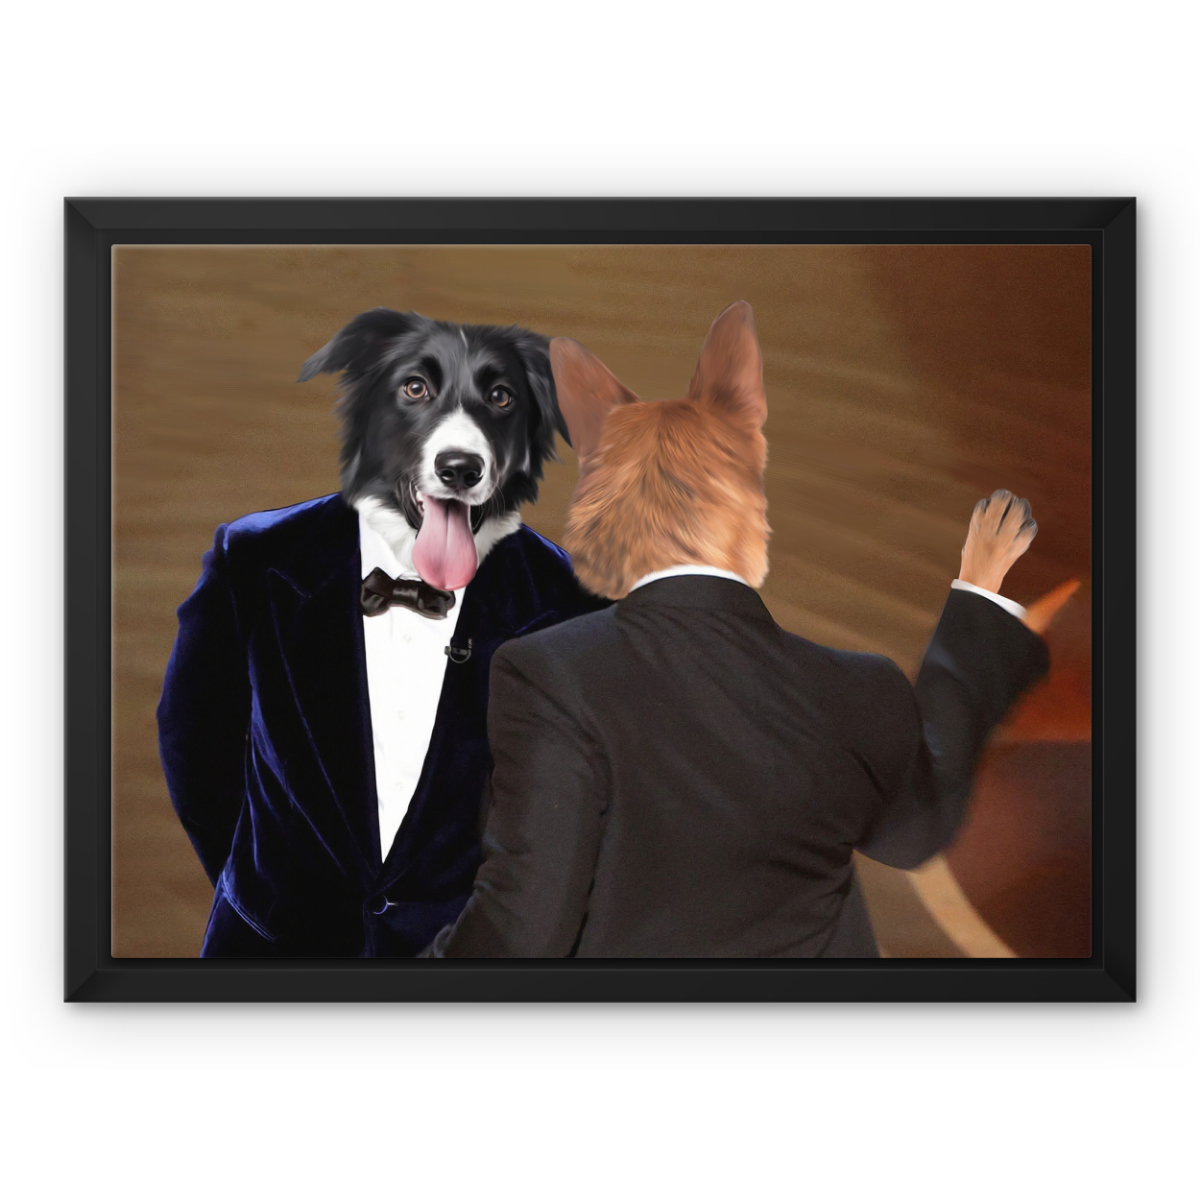 The Slap: Custom Pet Canvas, Paw & Glory, paw and glory, Purr and mutt dog portrait paintings, pet portraits from photos, pet portraits painted, custom dog paintings, pet photos on canvas,